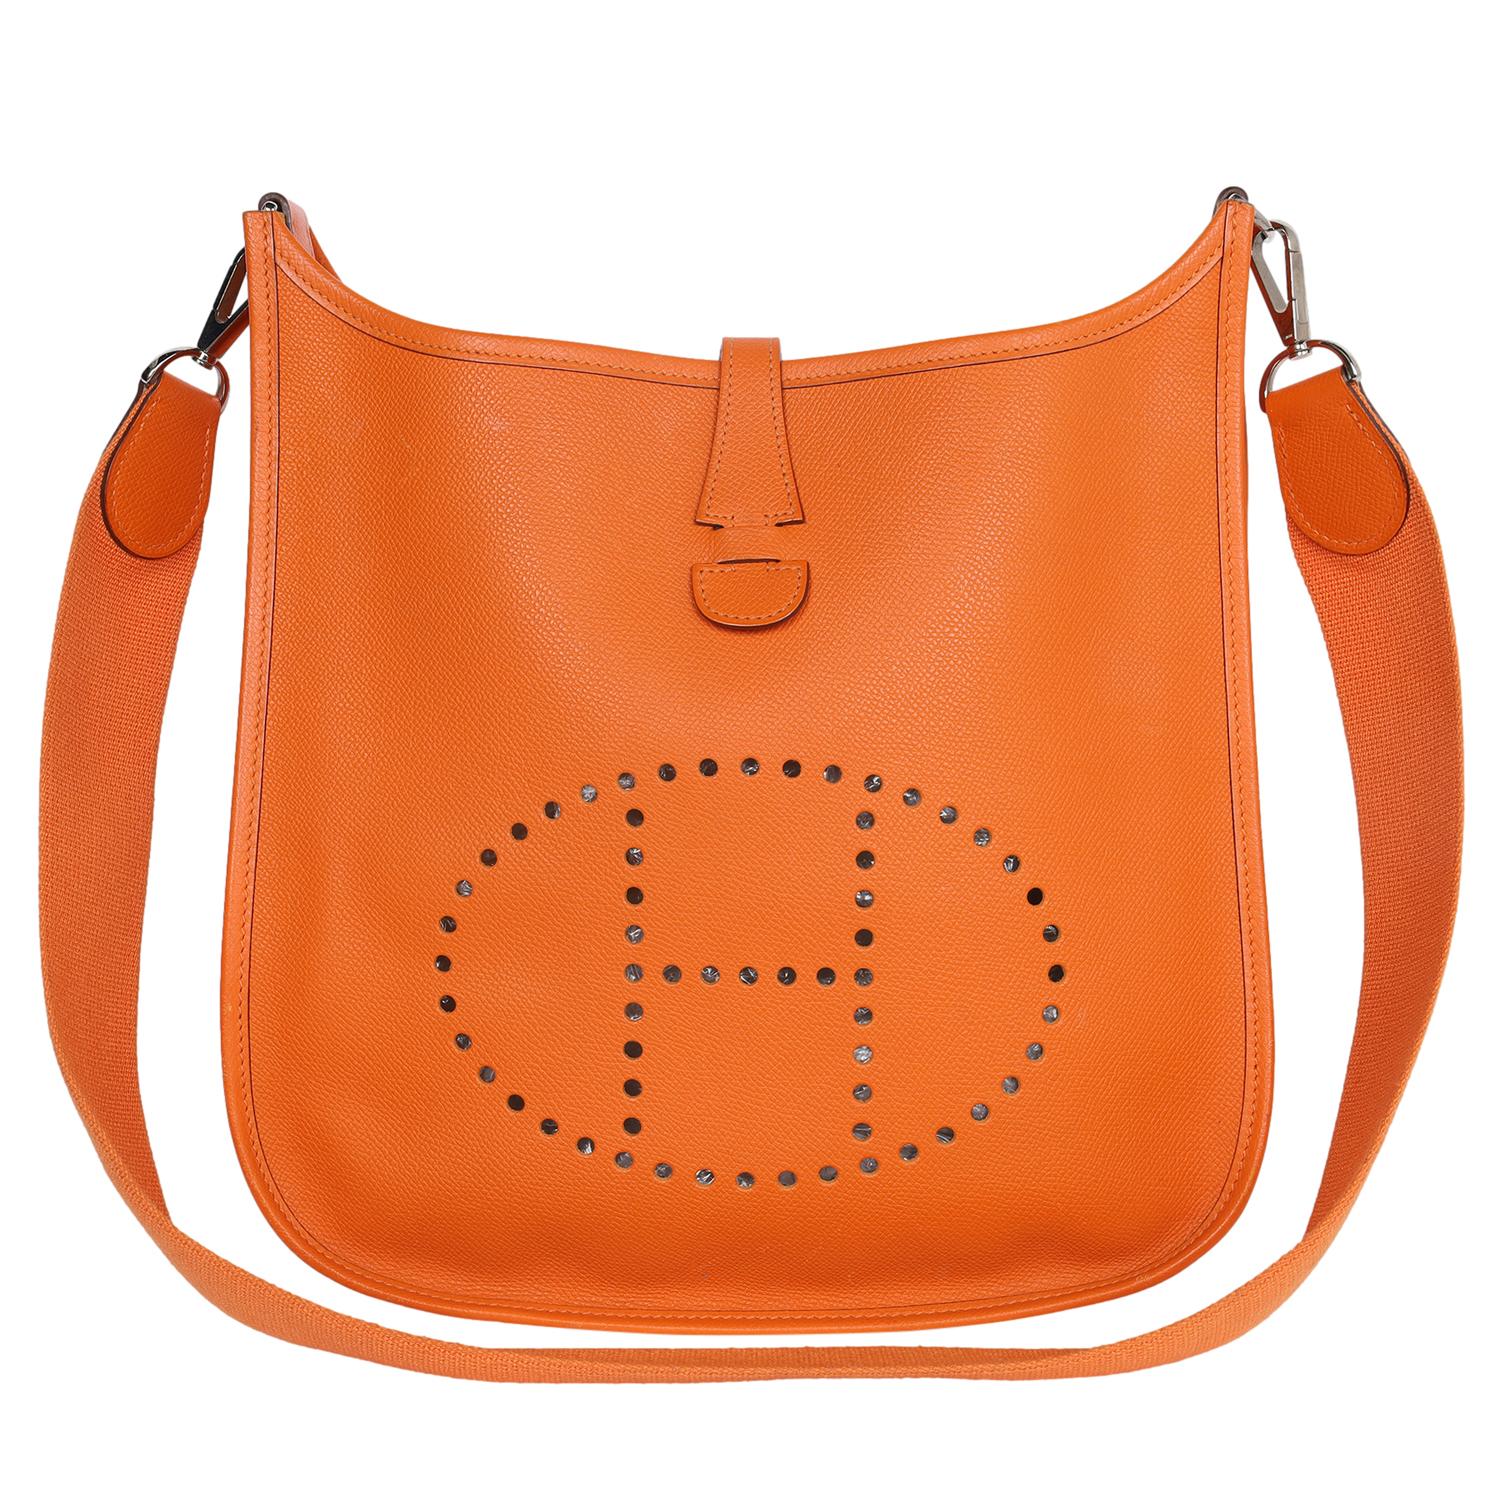 Authentic, pre-loved Hermes Orange Leather Evelyne I Shoulder Bag.

Features a perforated logo display on the front, and a flat shoulder strap, the bag can be worn comfortably over the shoulder. The upper opening is secured with the help of a snap